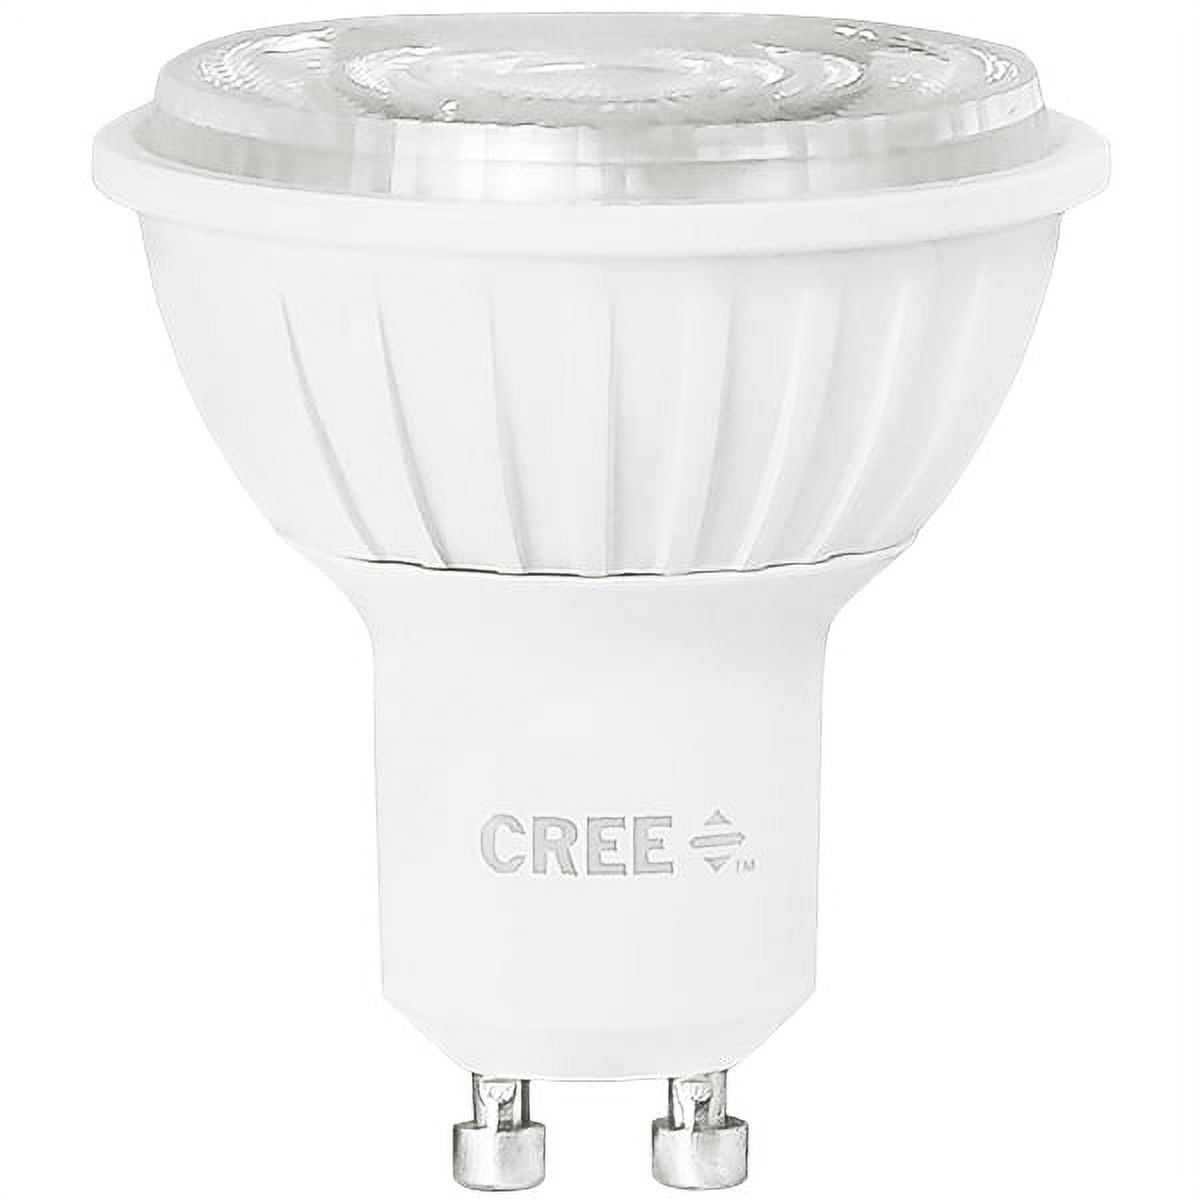 Cree Lighting Pro Series MR16 GU10 50W Equivalent LED Bulb, 35 Degree  Flood, 440 lumens, Dimmable, Bright White 3000K, 25,000 hour rated life,  90+ CRI